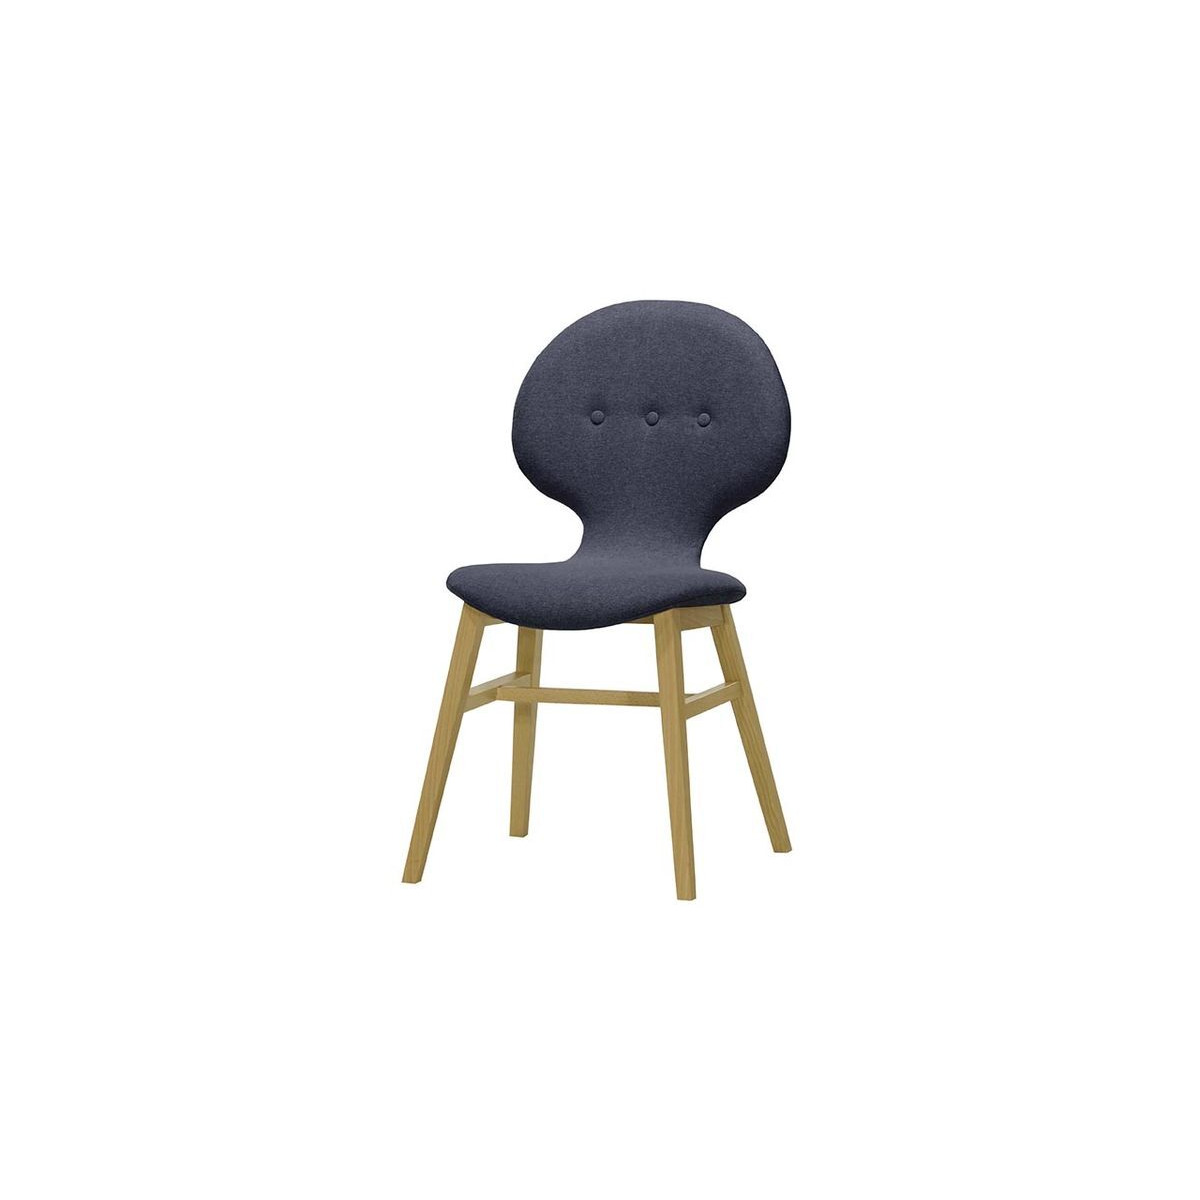 Altay Dining Chair, grey, Leg colour: black - image 1